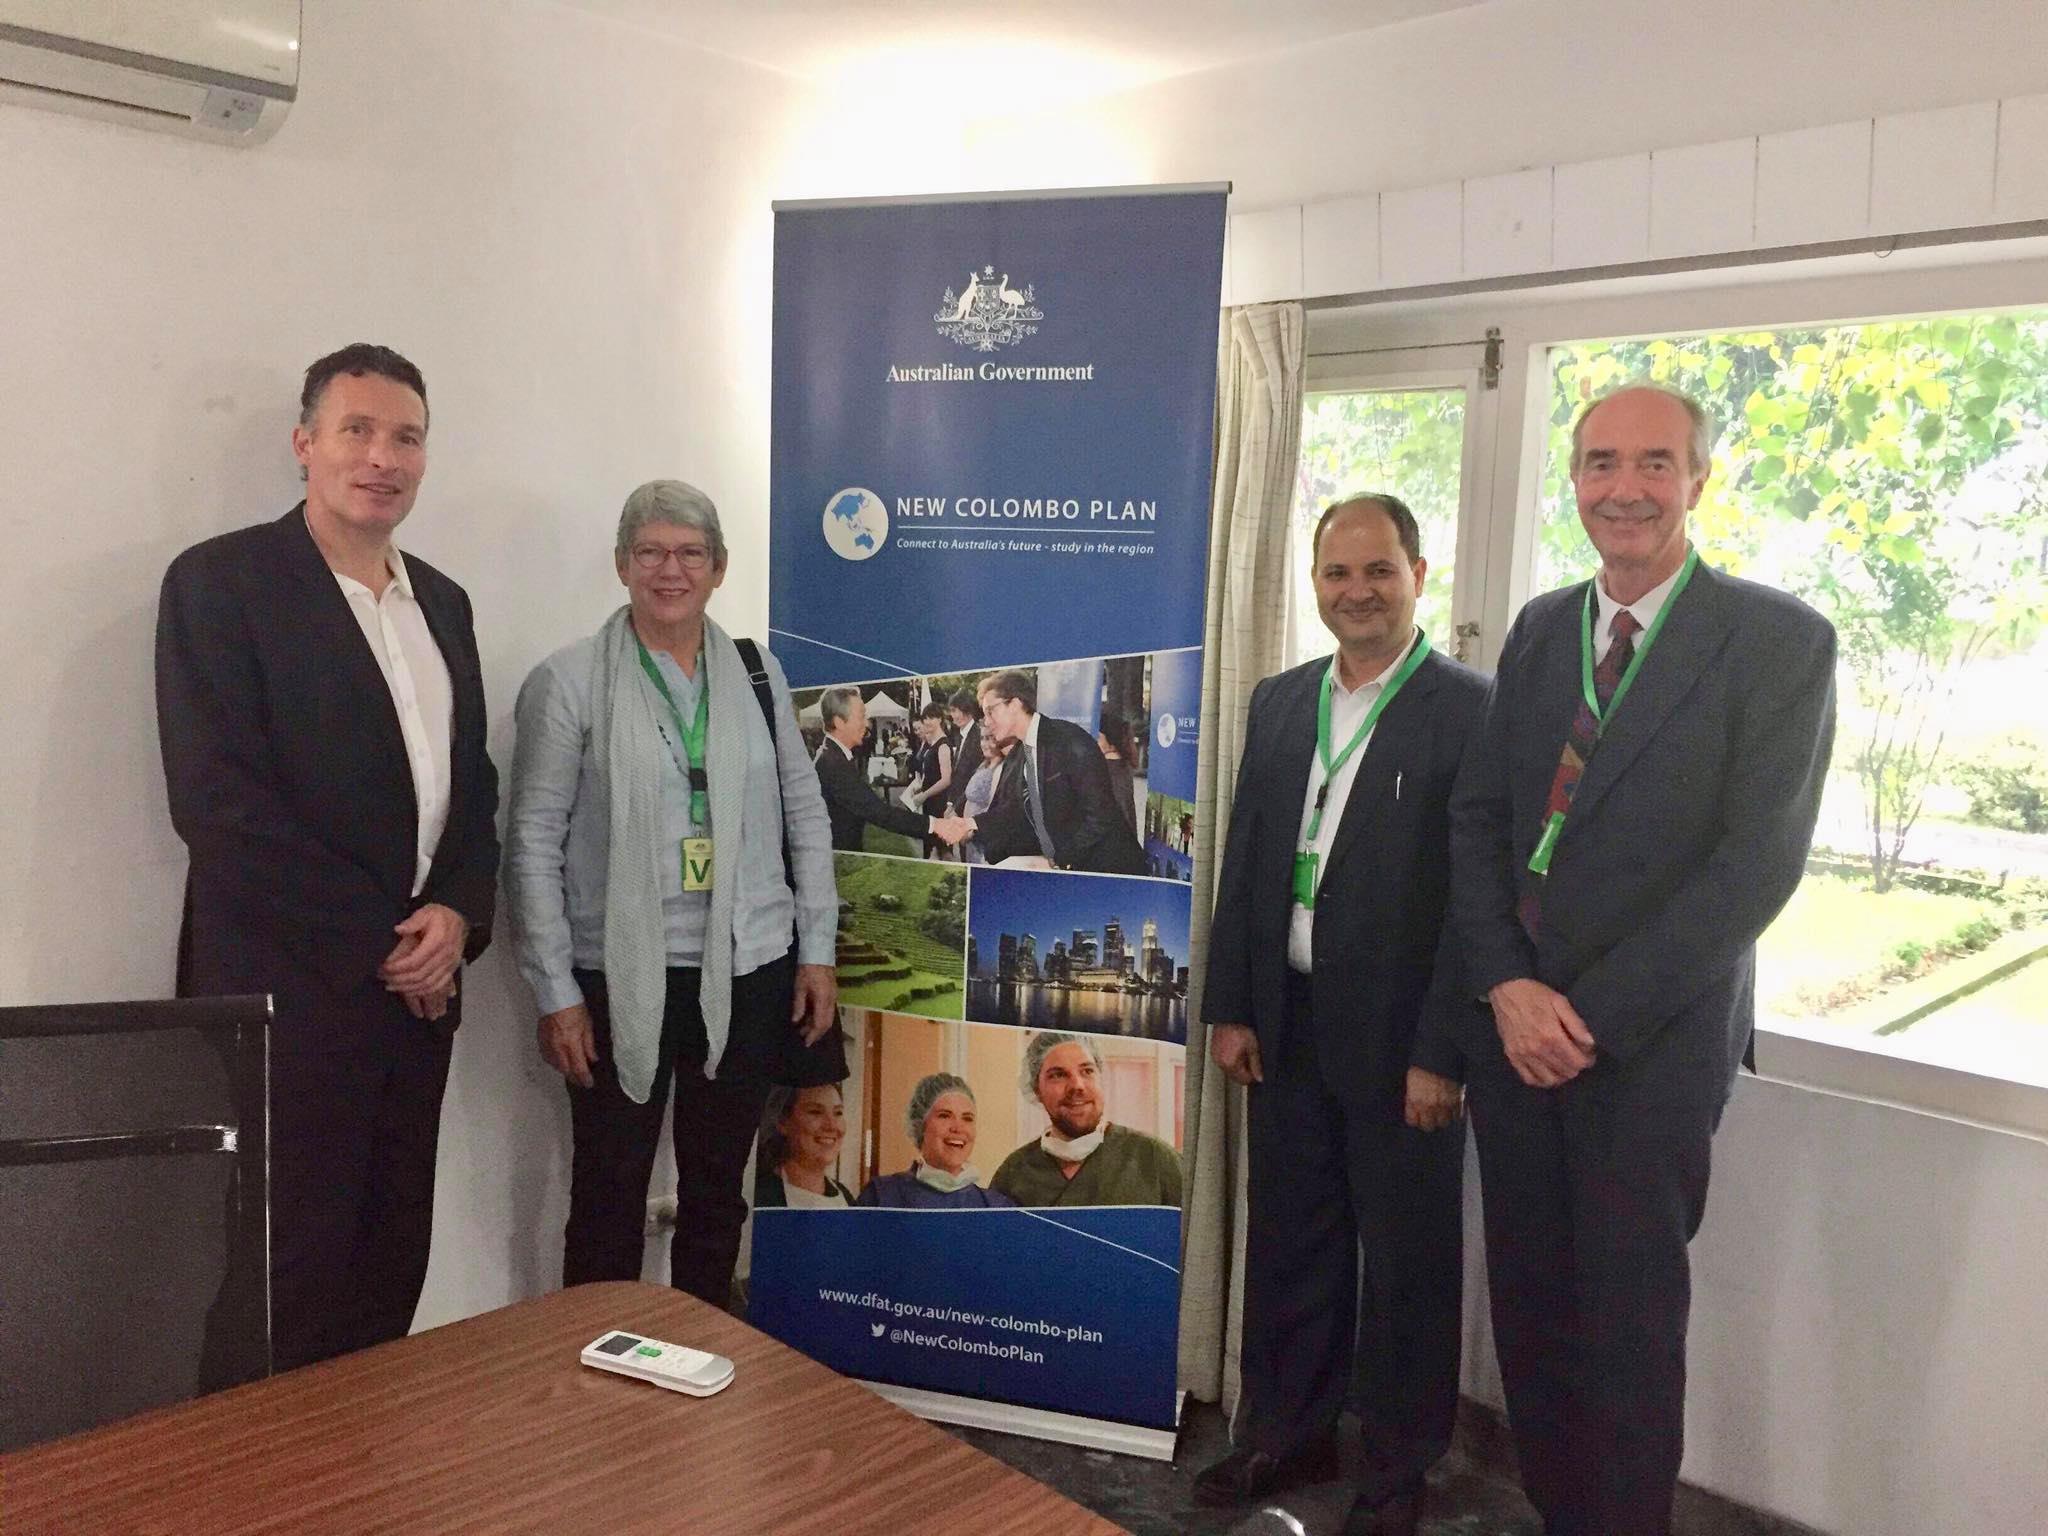 Meeting with His Excellency Peter Budd, Australian Ambassador to Nepal along with Laureate Professor Roger Smith AM and Mrs. Annie Smith to discuss  potential collaboration to improve air retrieval of obstetrics emergency cases.